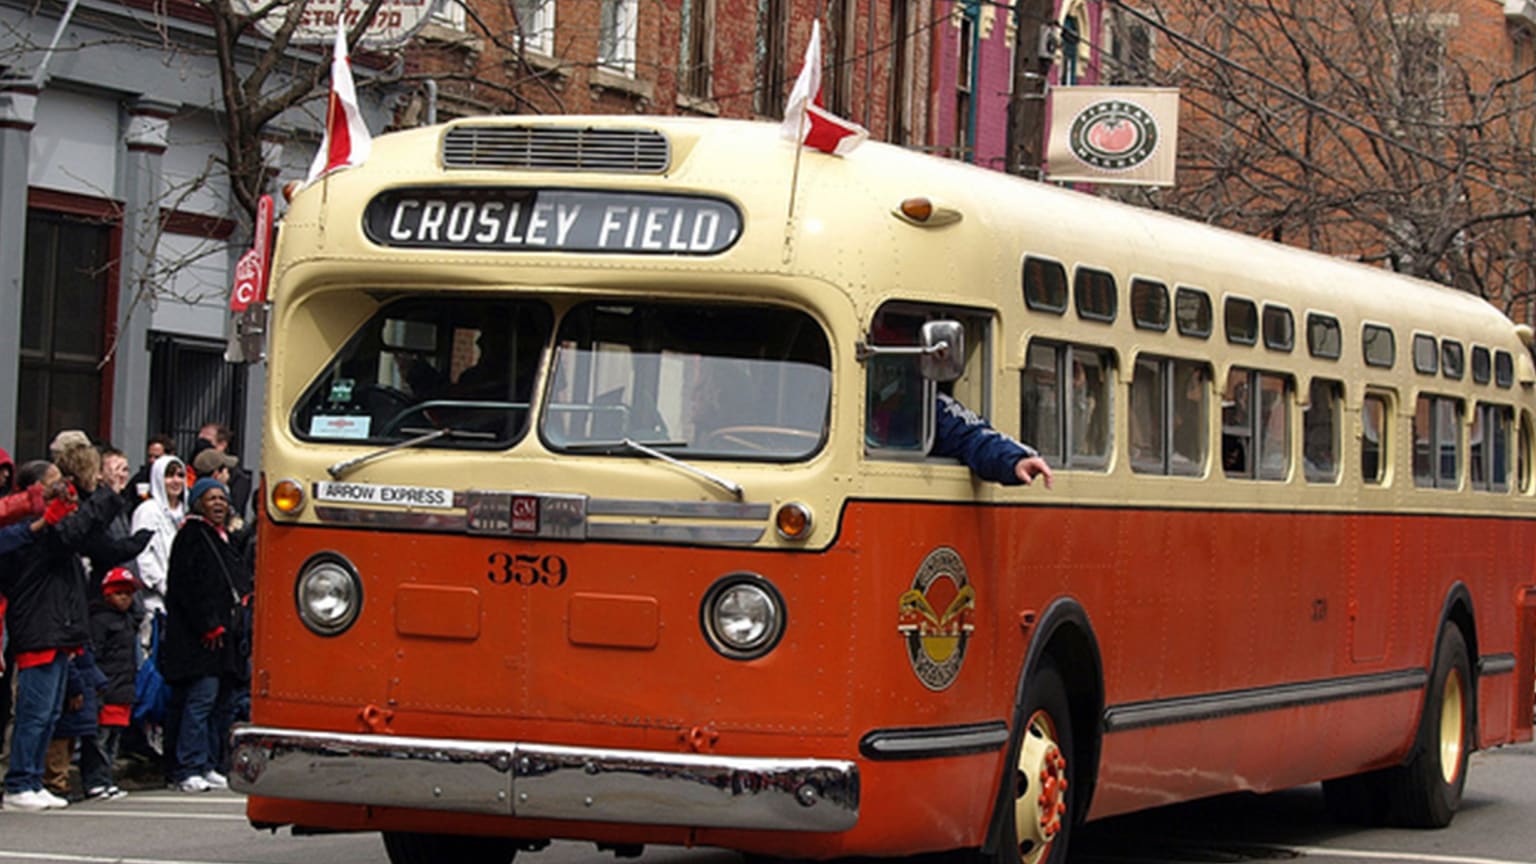 How to get to Great American Ball Park in Cincinnati by Bus or Light Rail?